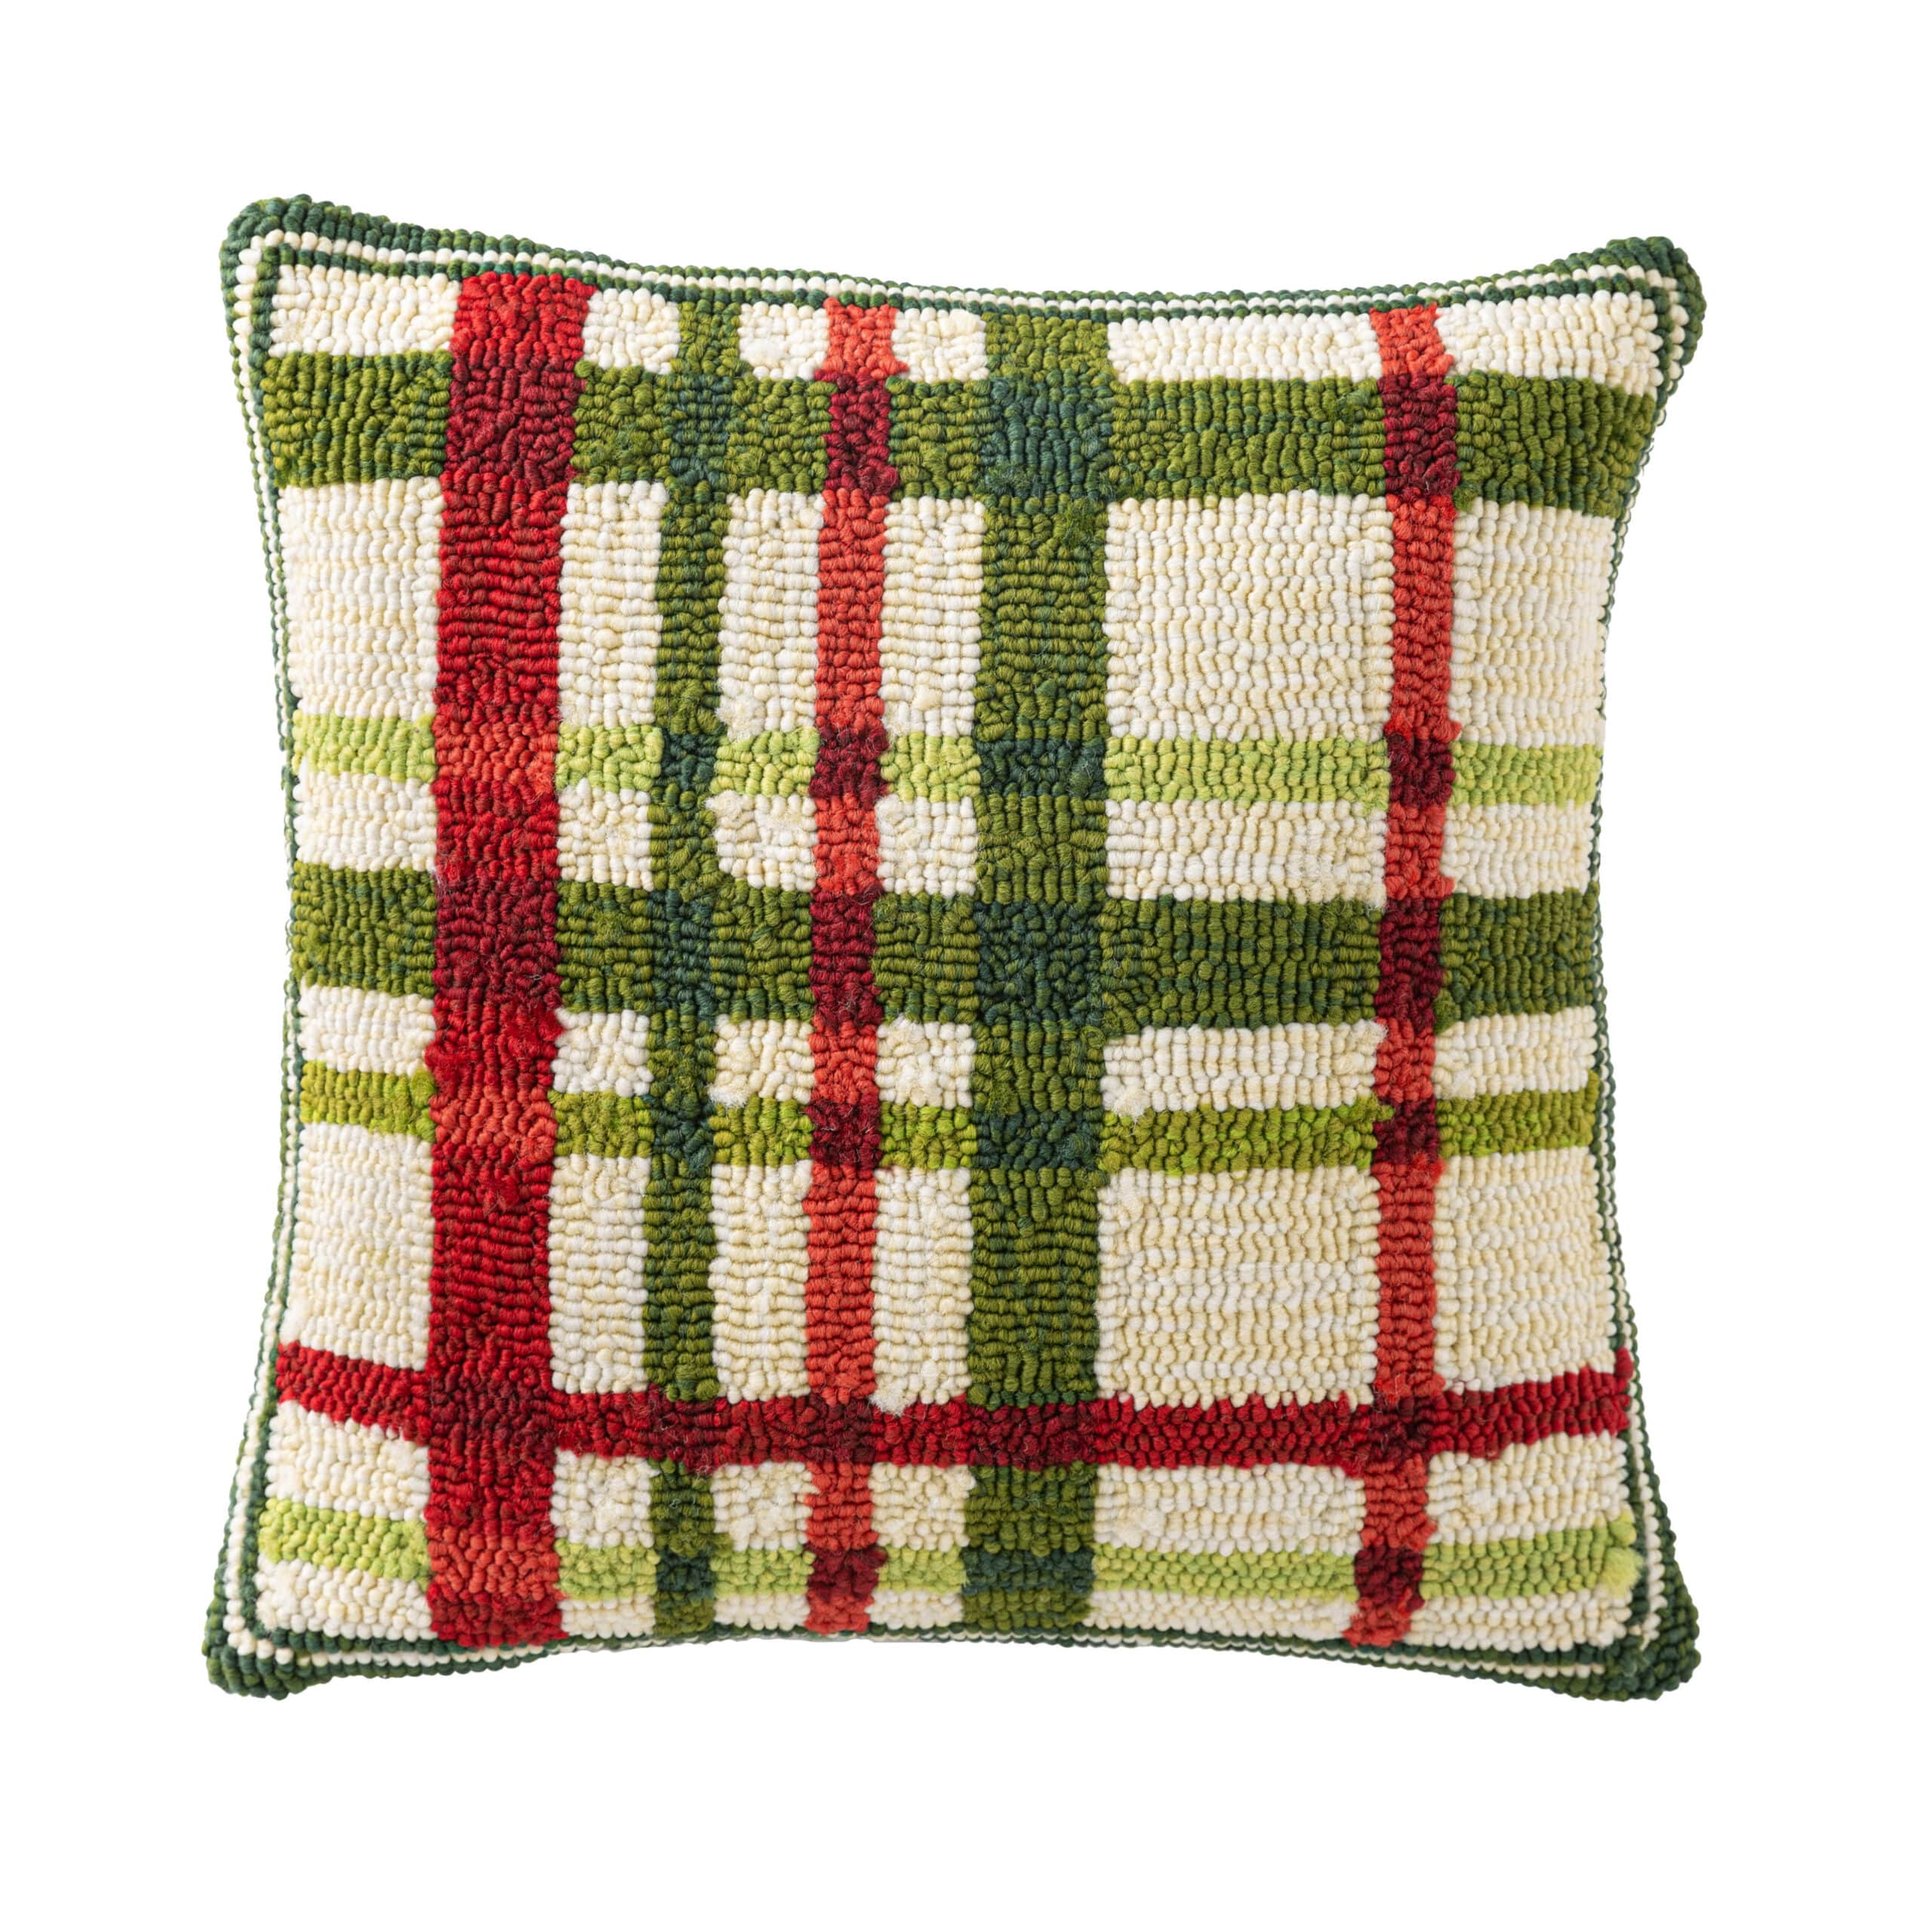 Indoor/Outdoor Hooked Plaid Christmas Pillow image